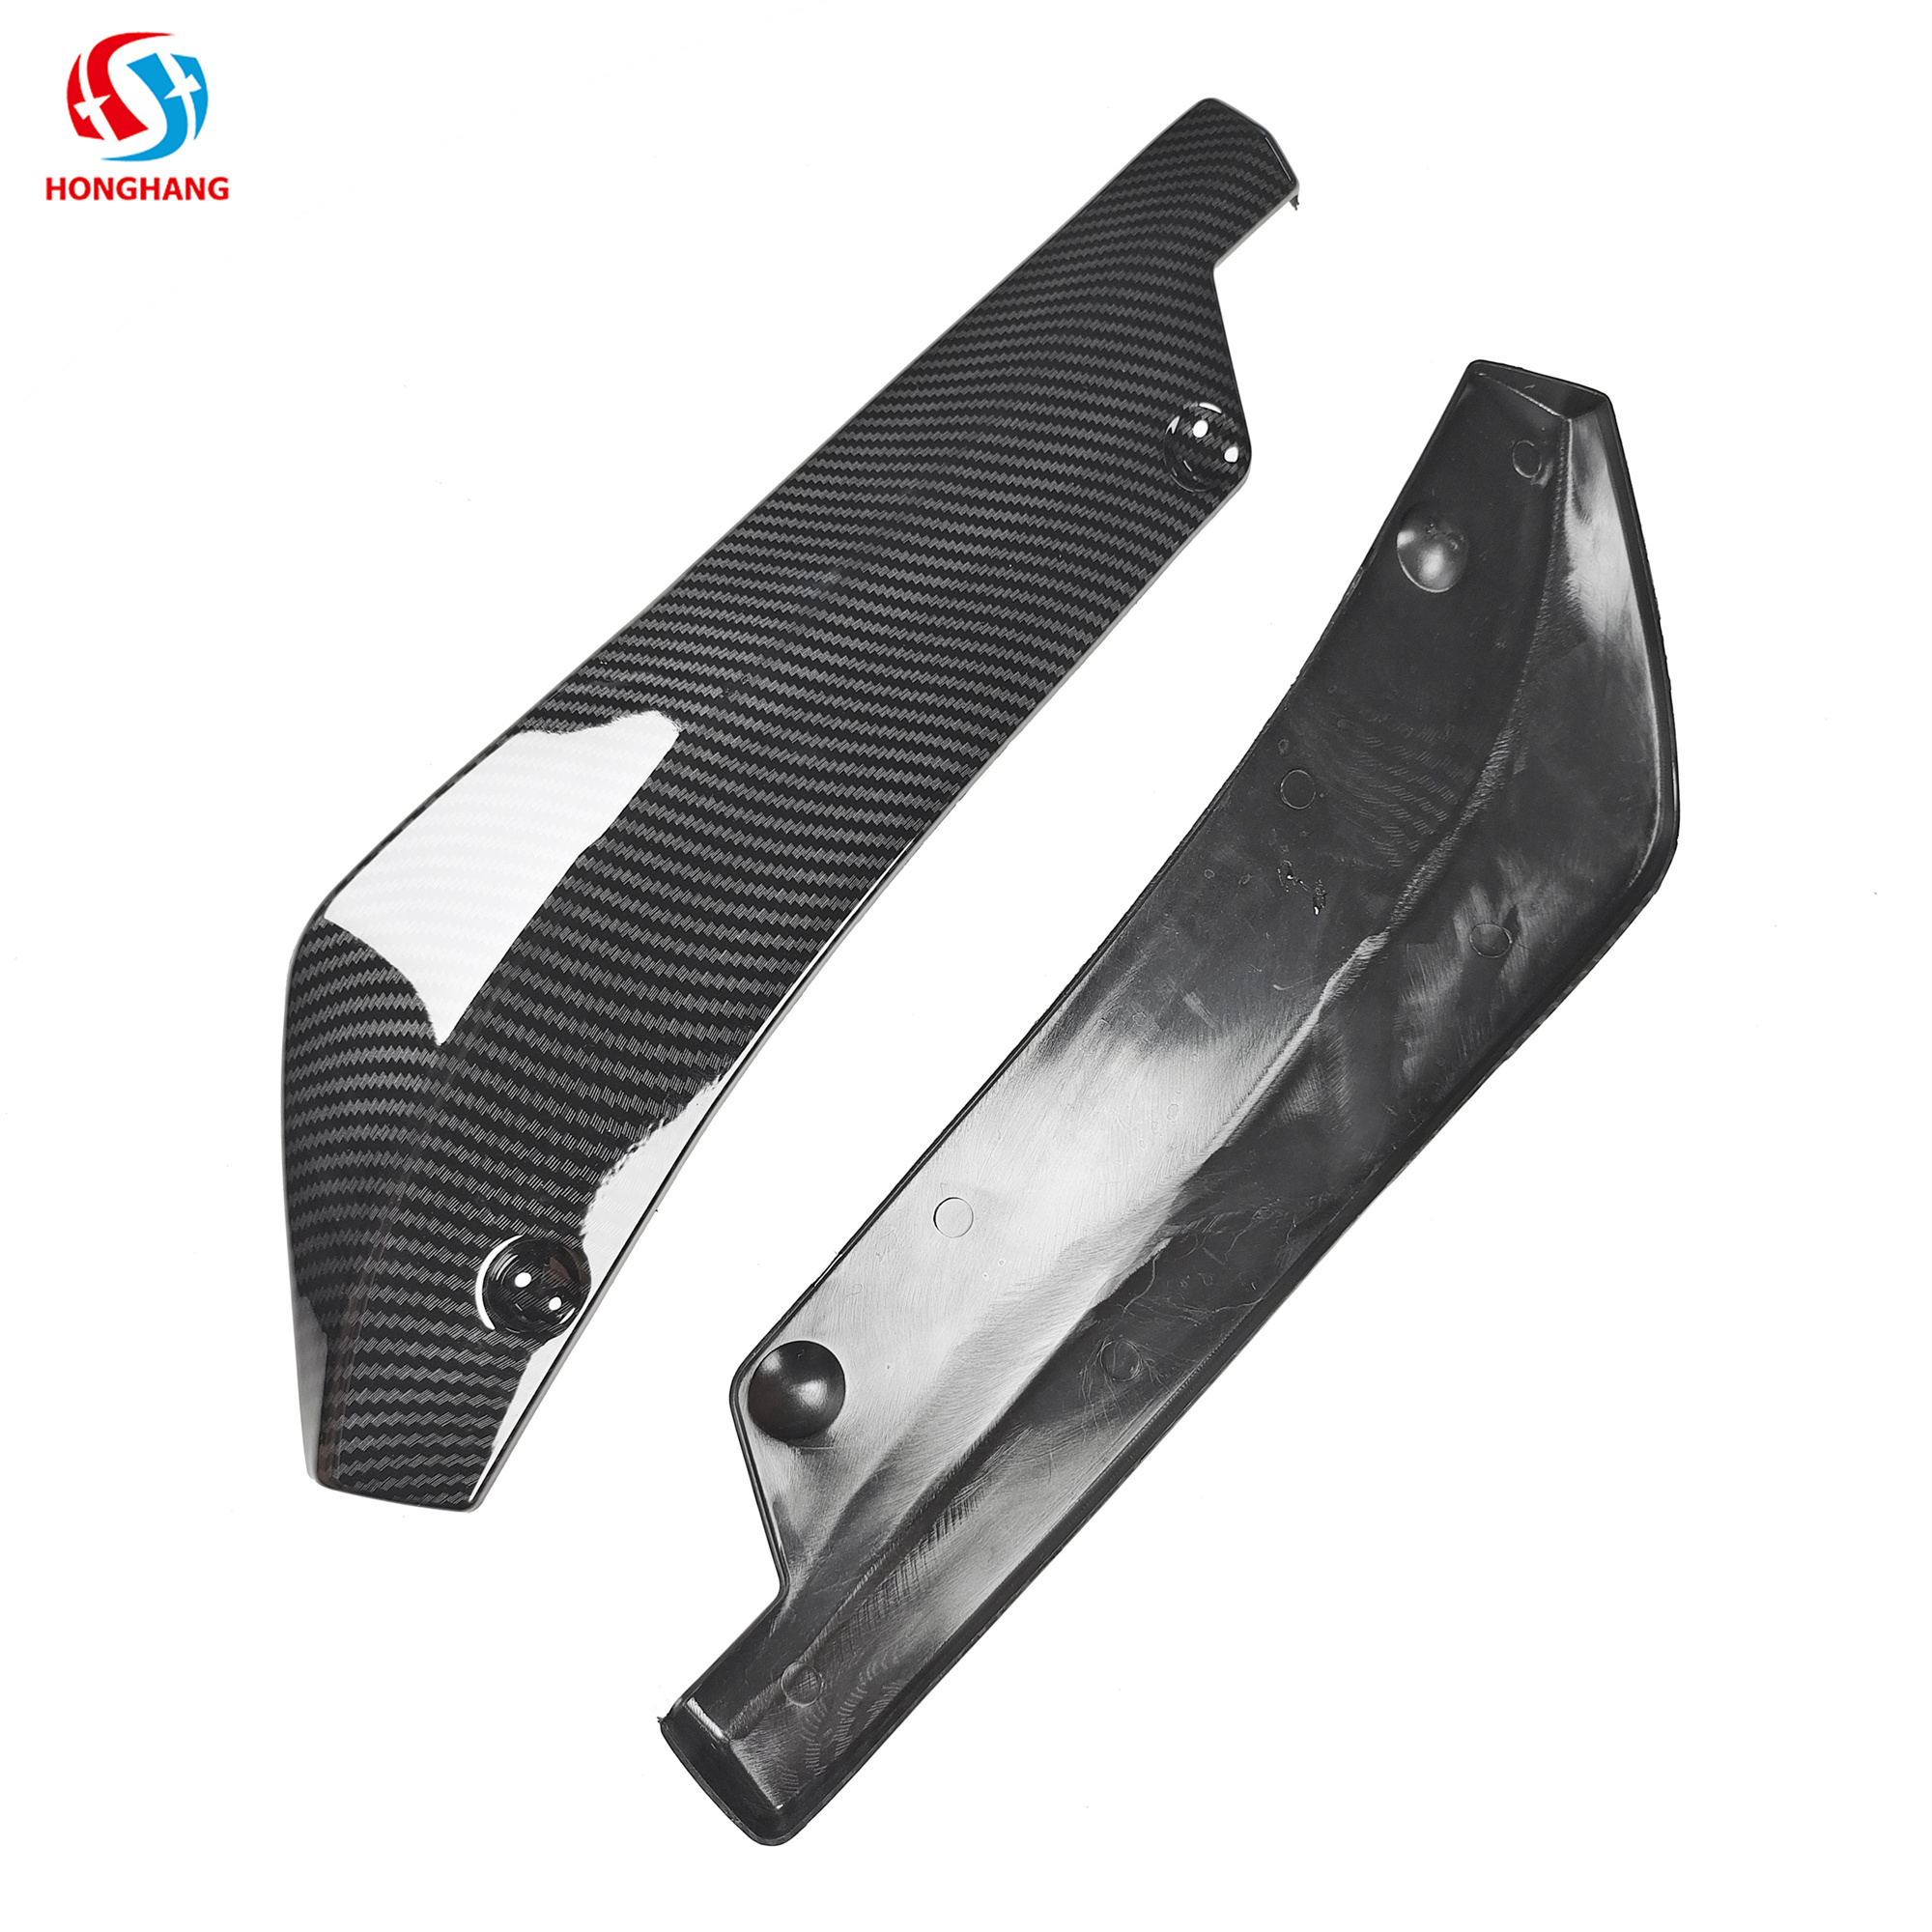 Type A Universal Rear Bumper Side Corner Protector For All Cars 